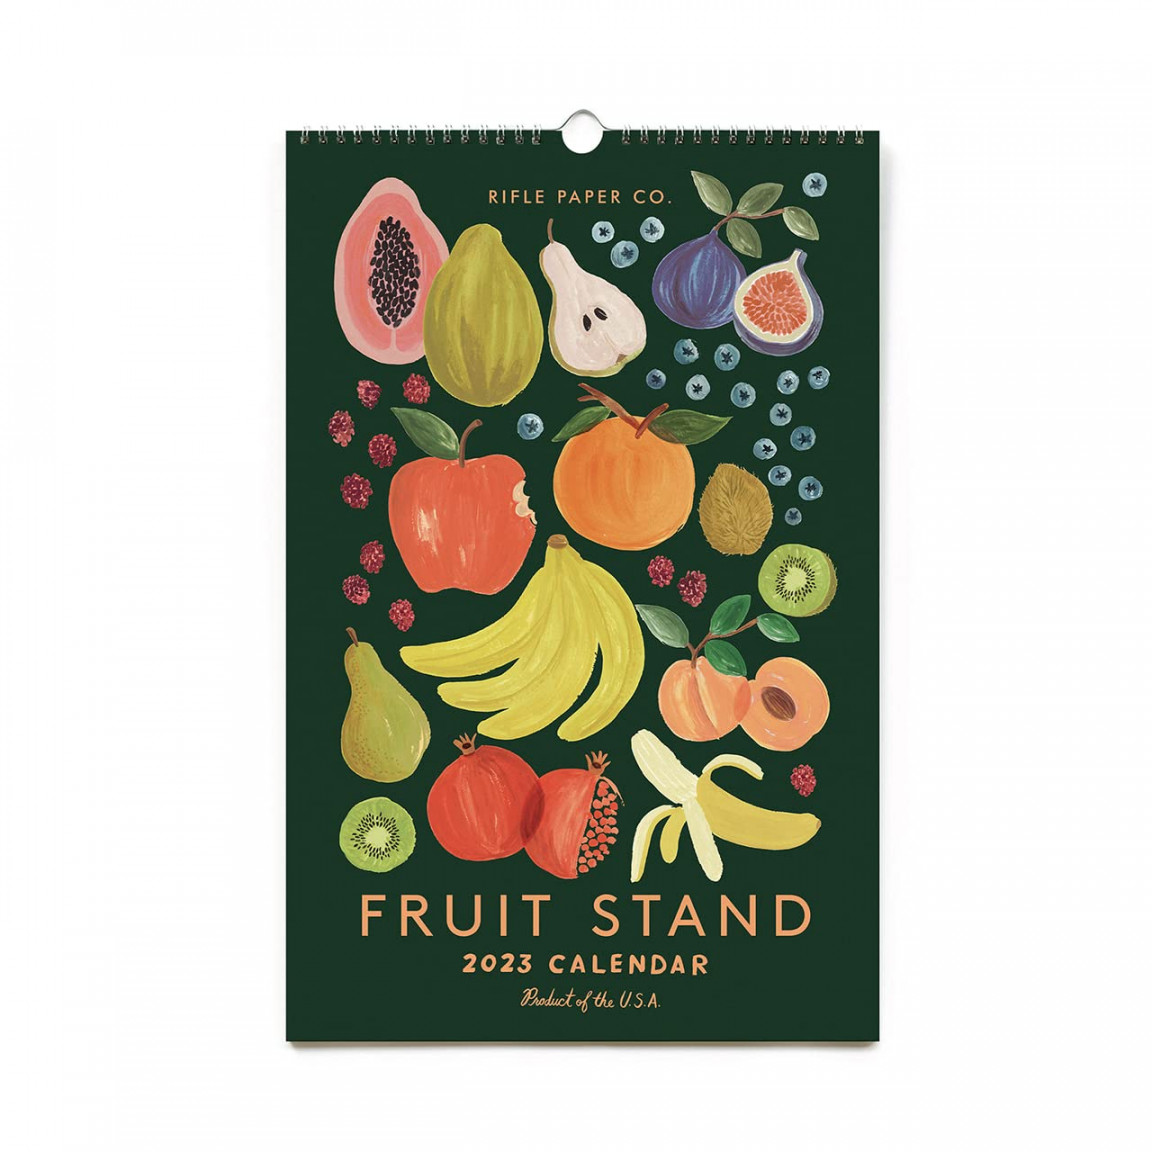 RIFLE PAPER CO. Fruit Stand  Wall Calendar, Features  Signature Fruit  Stand Illustrations, DouSee more RIFLE PAPER CO